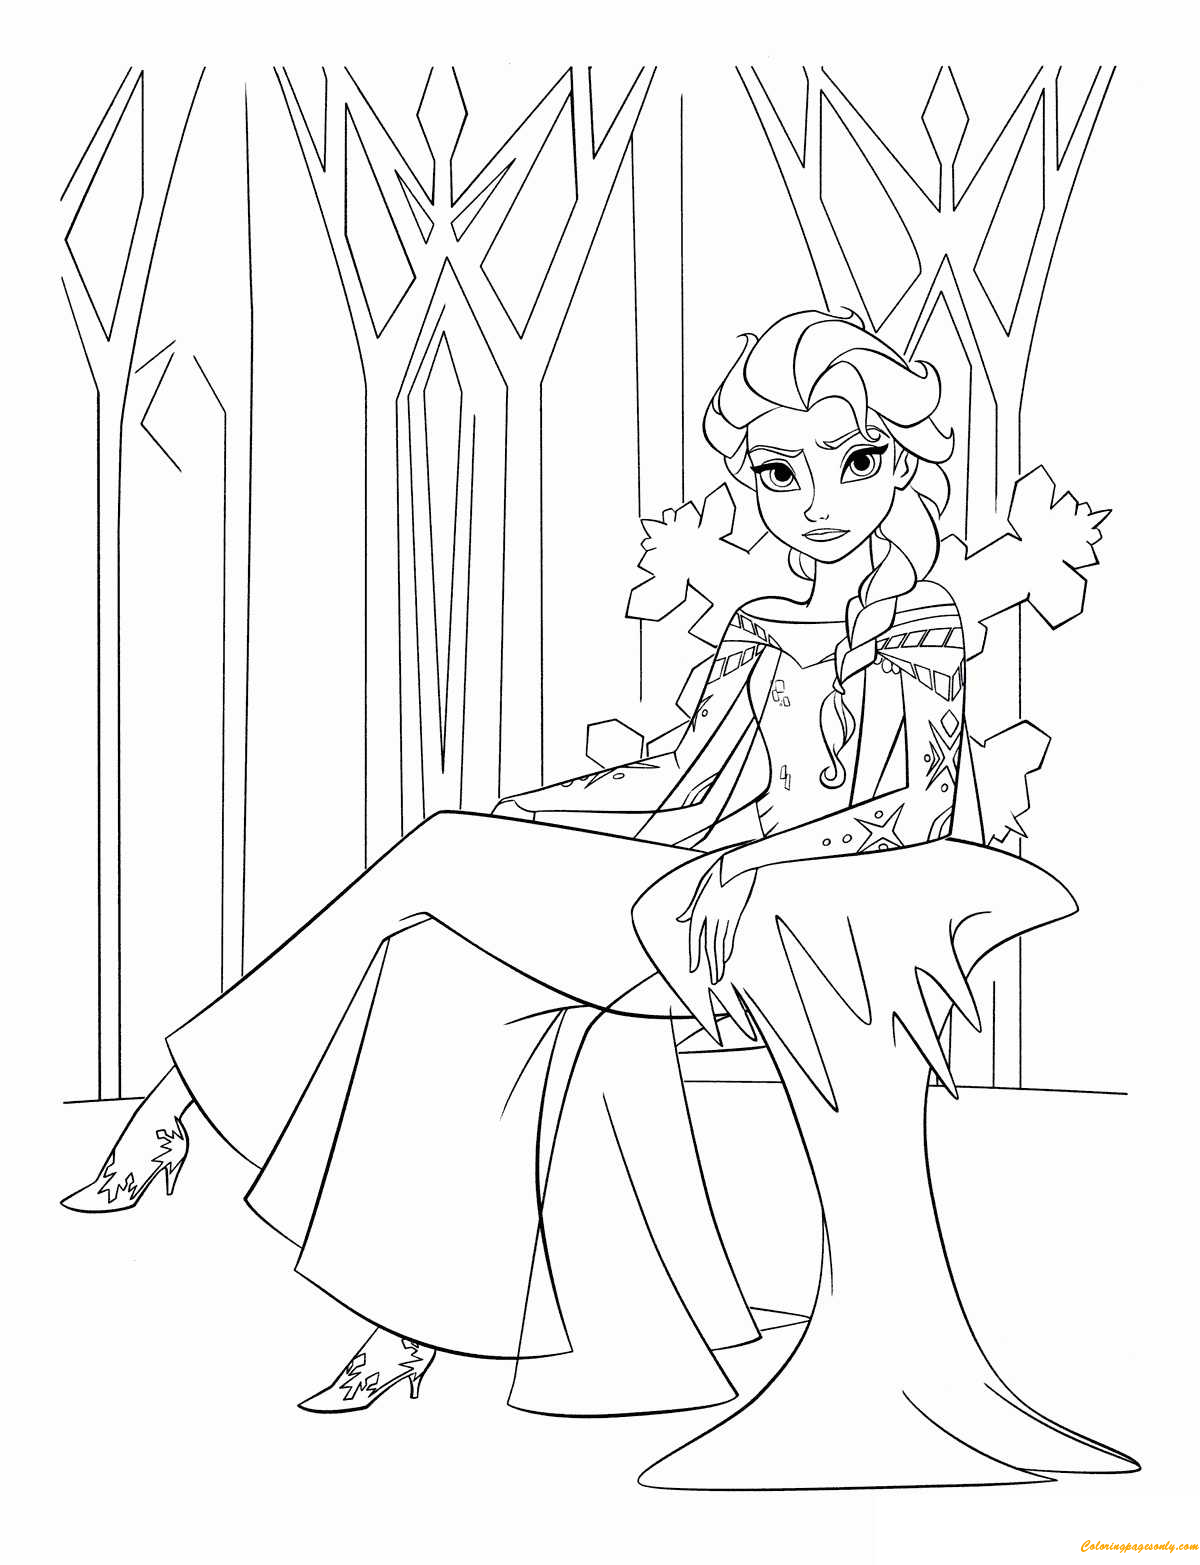 Queen Elsa Of Arendelle Coloring Pages - Cartoons Coloring Pages - Free  Printable Coloring Pages Online